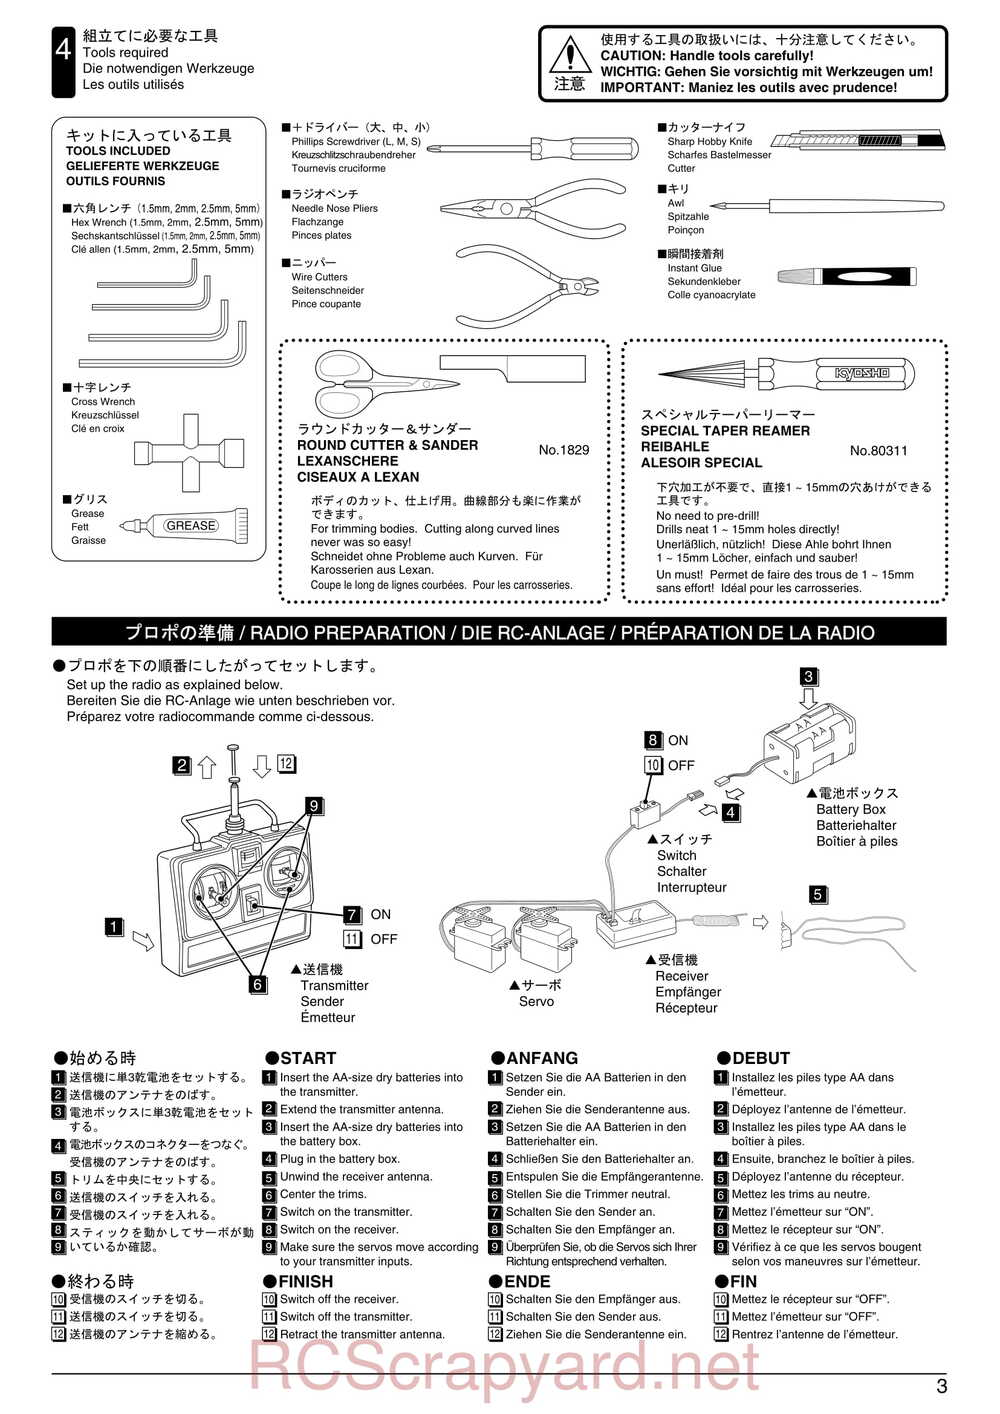 Kyosho - 31241 - V-One-S - Manual - Page 03